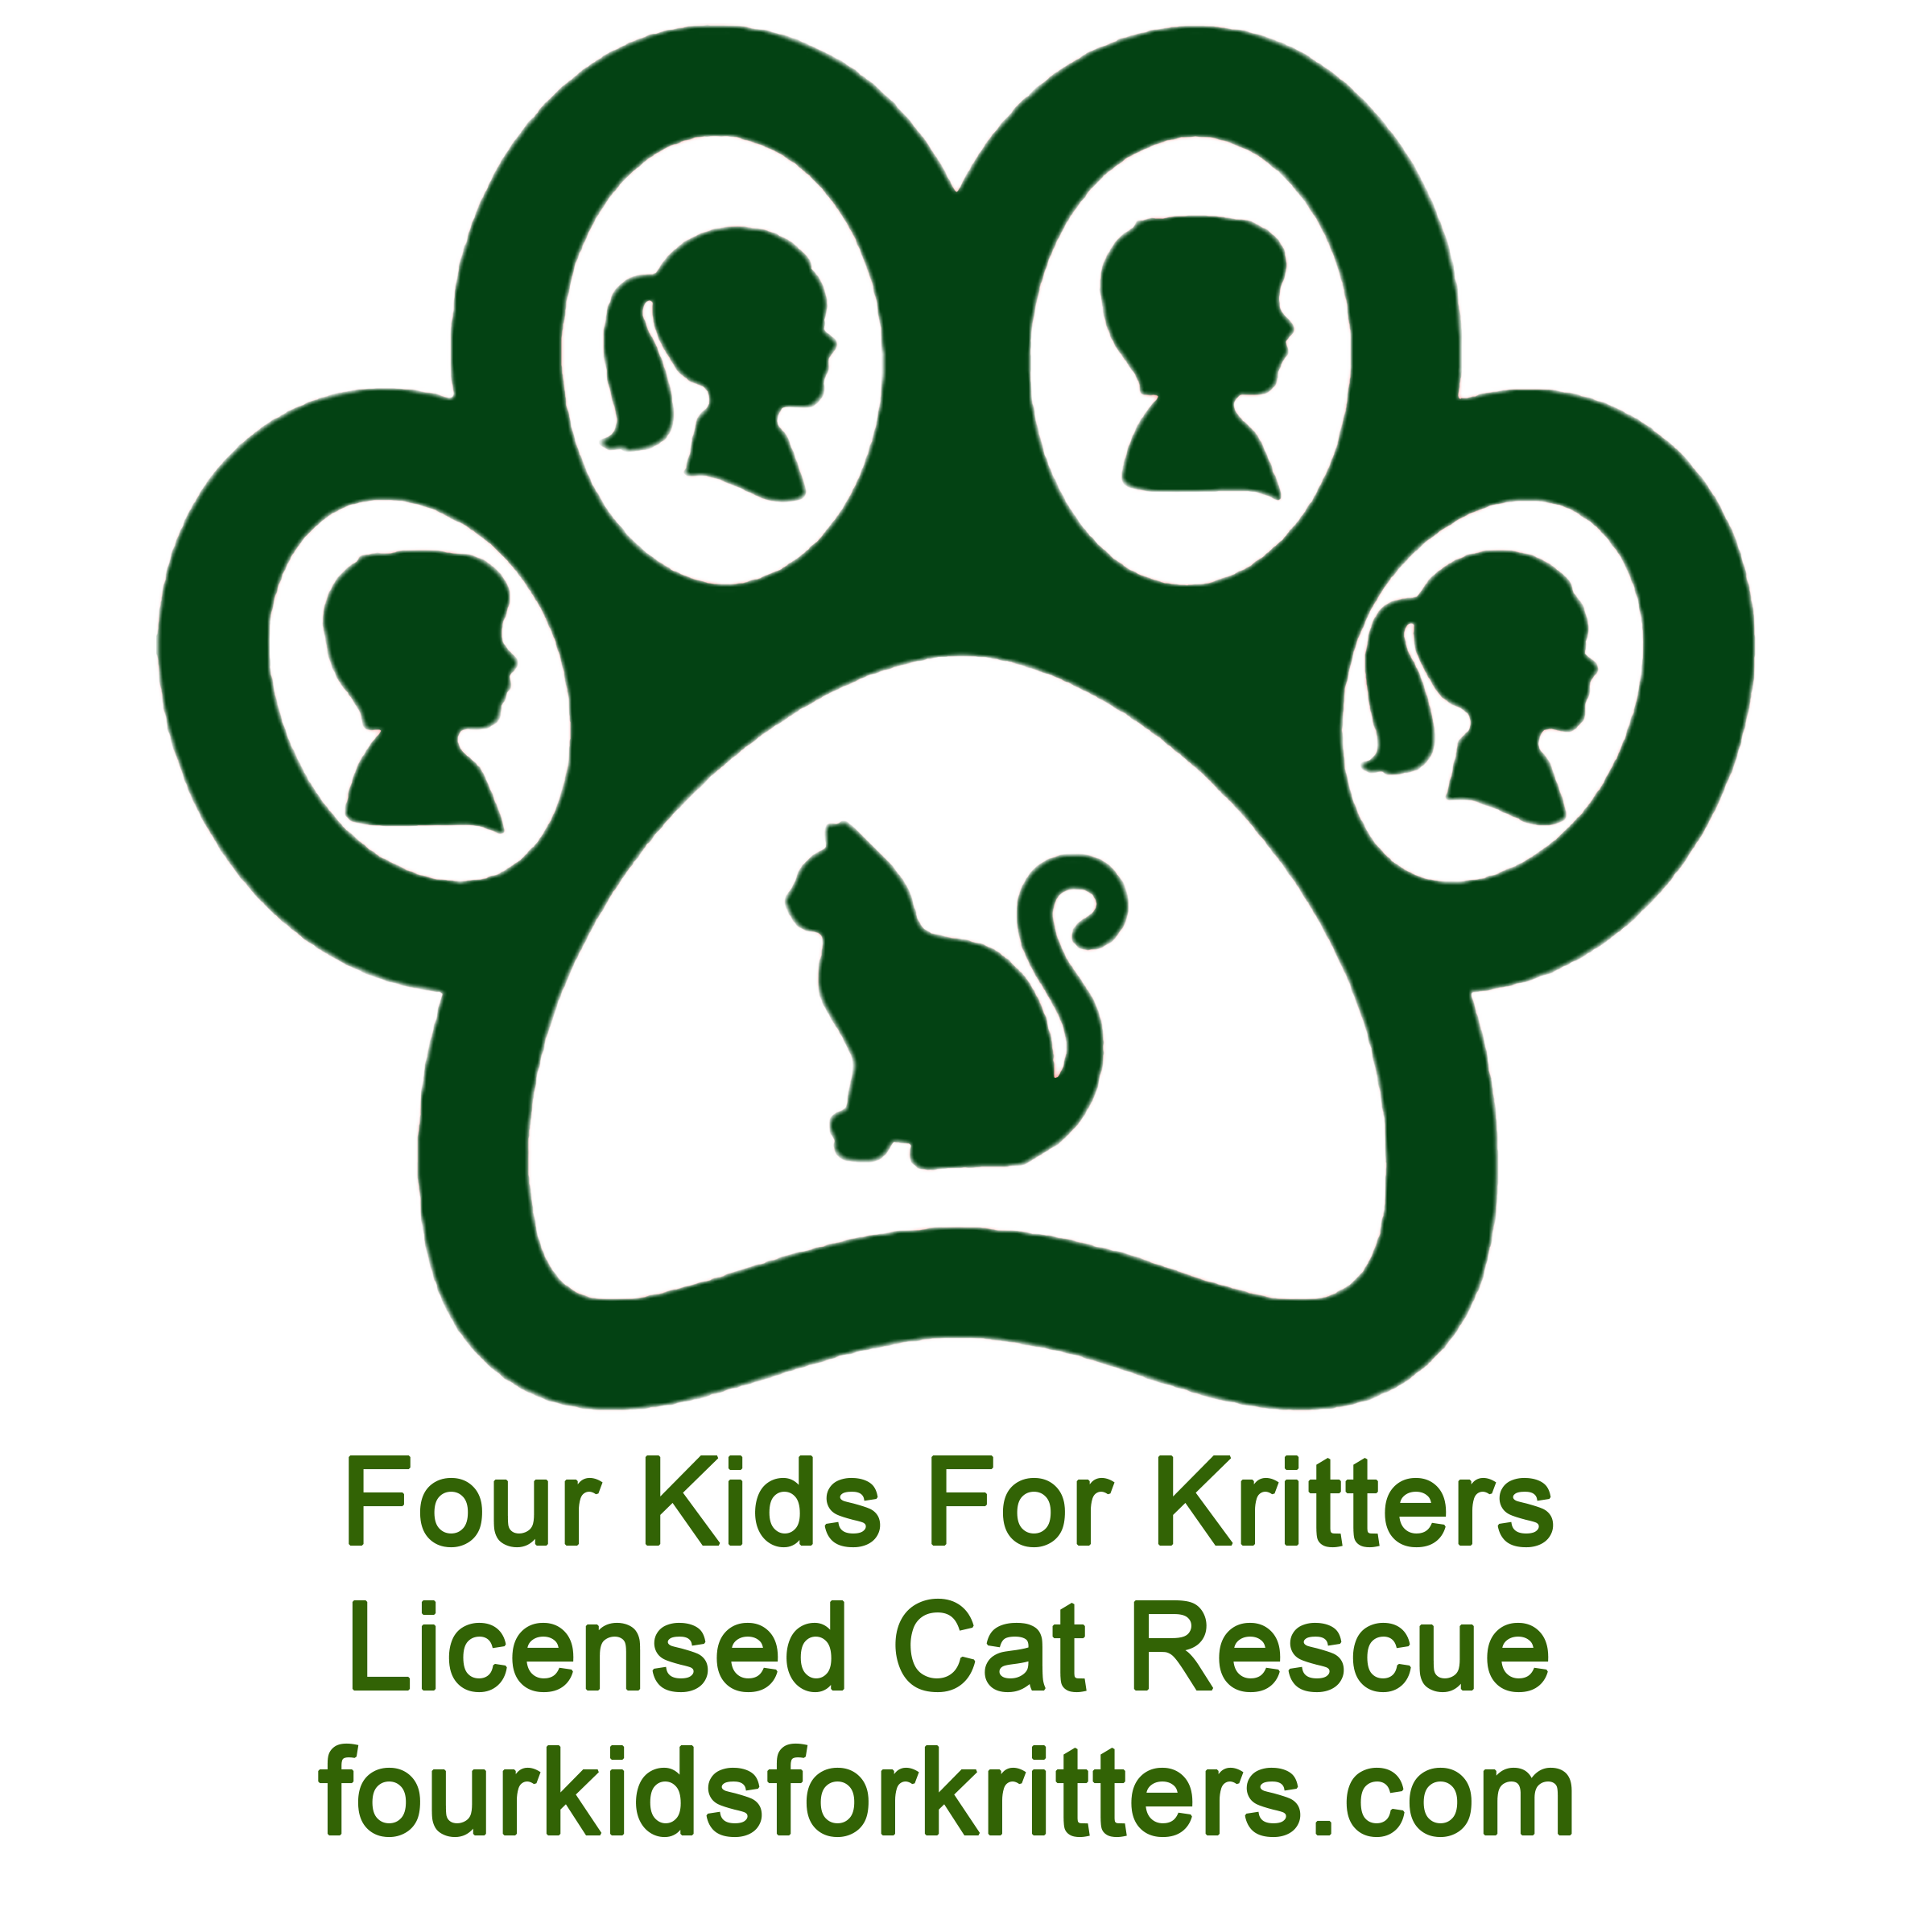 Four Kids For Kritters